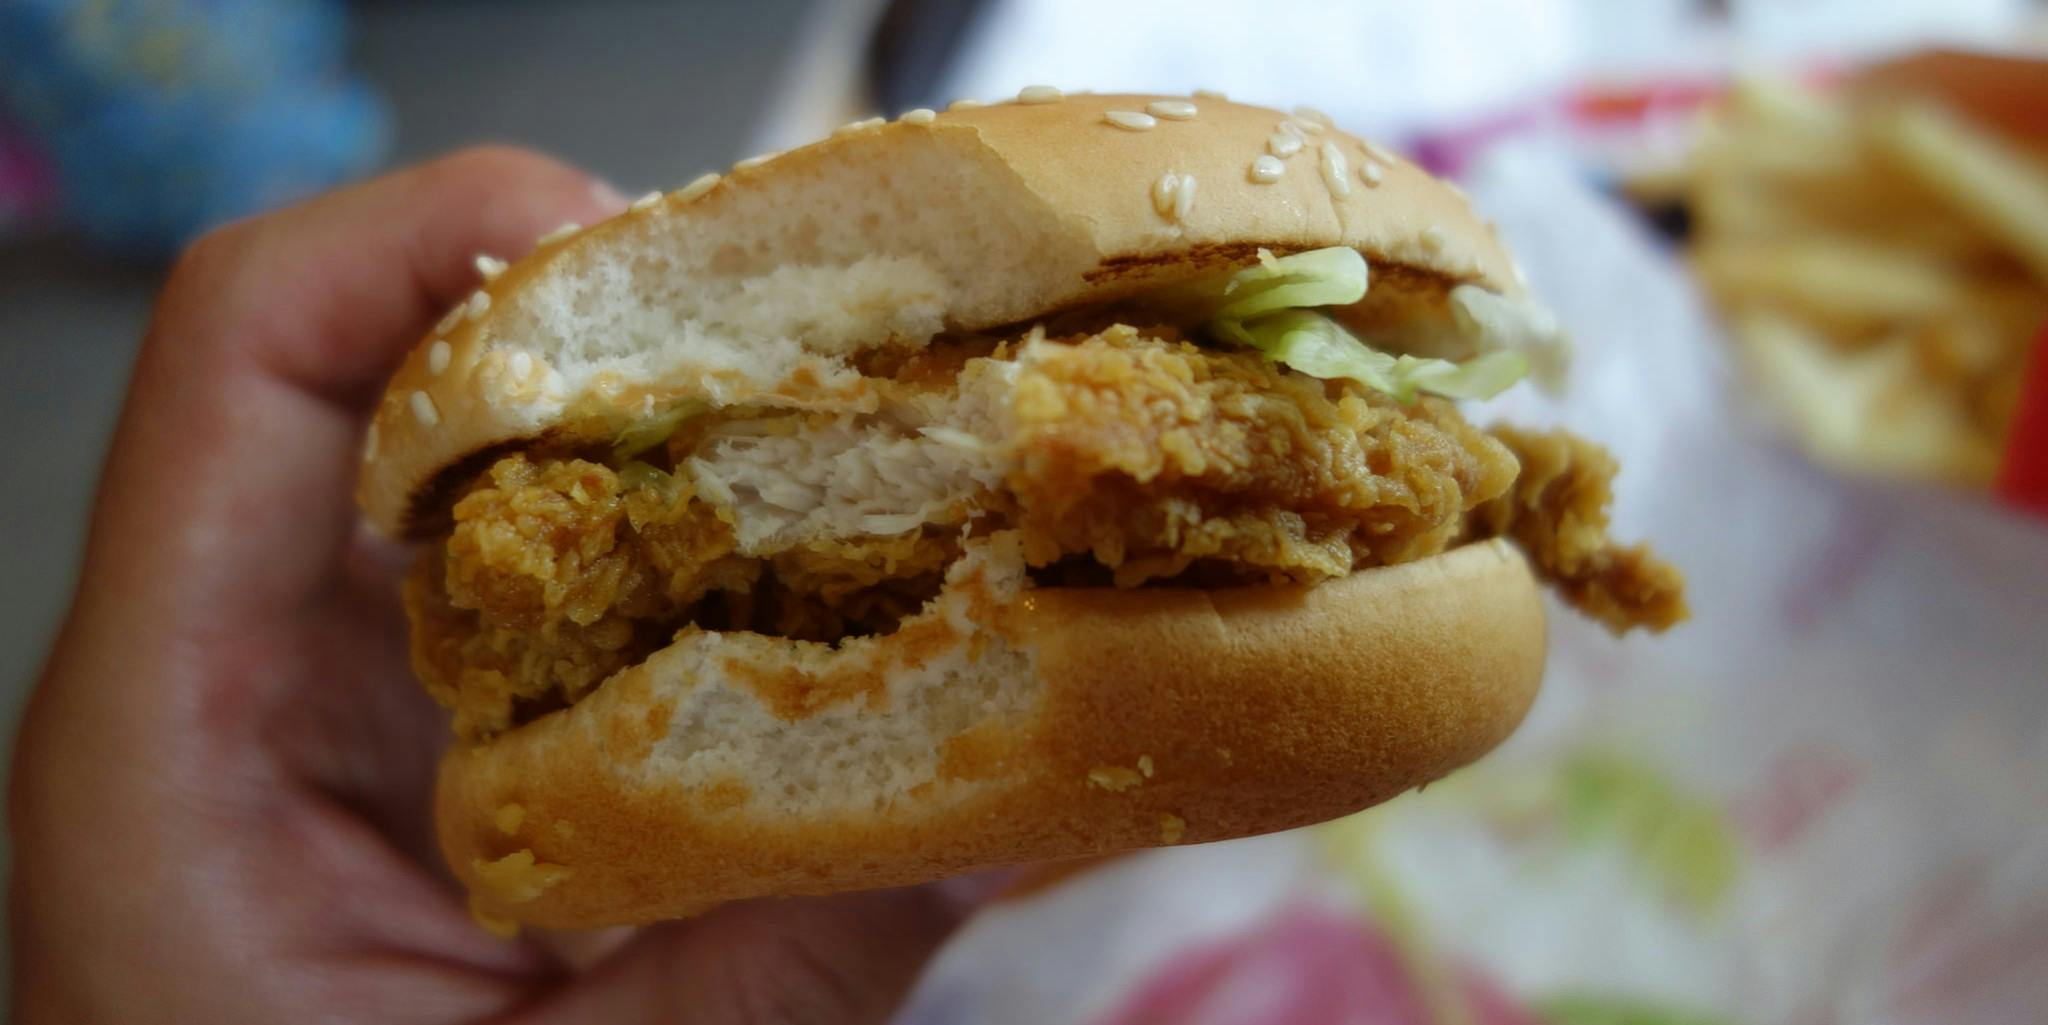 Some dude had sex with a McChicken—and the internet is freaking out